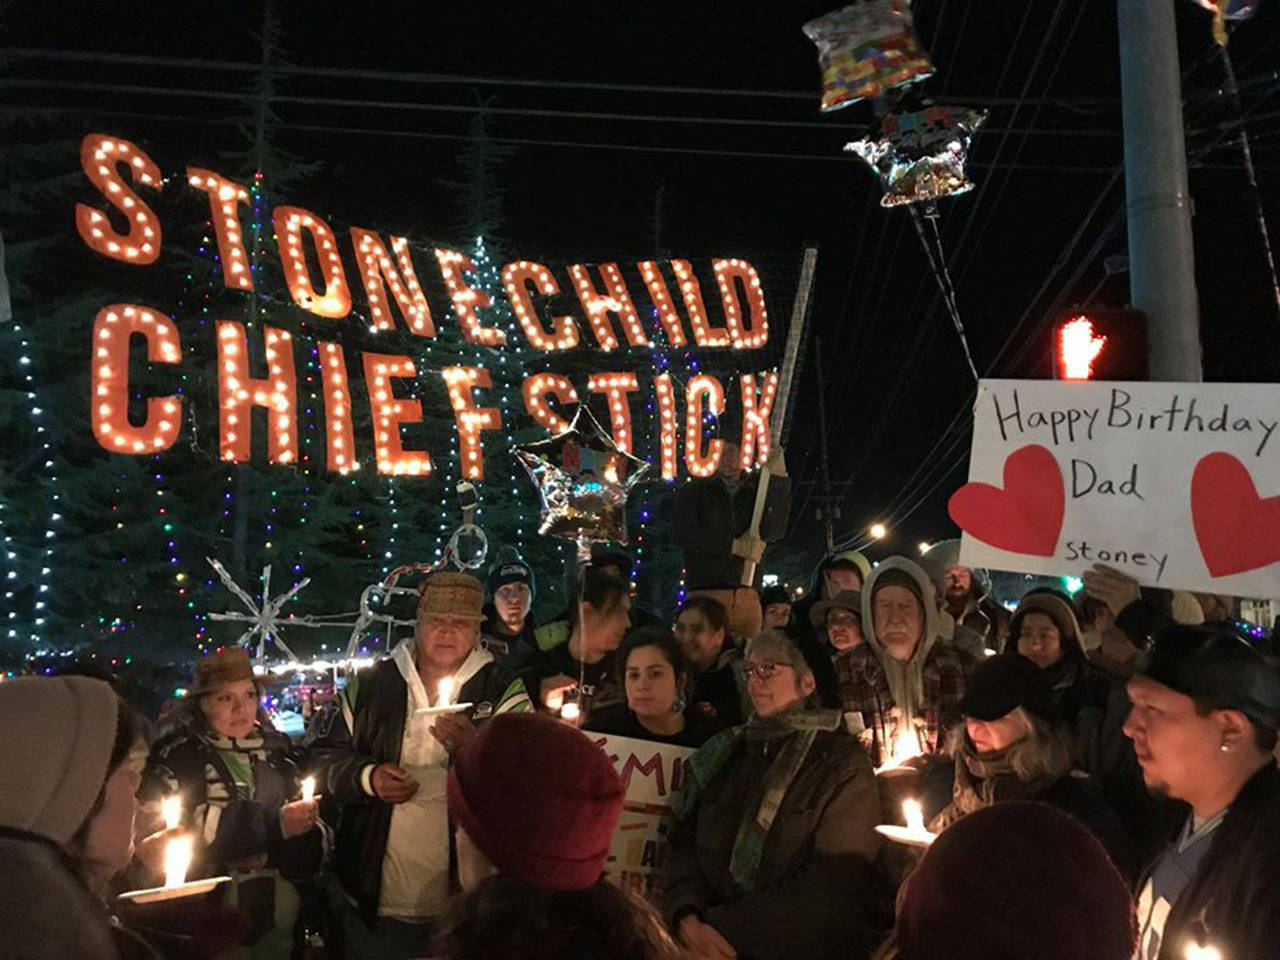 Family, Friends and community members of Stonechild Chiefstick celebrated his 40th Birthday, which coincided with the Poulsbo Christmas Tree Lighting. (photos by Ashley Ann)